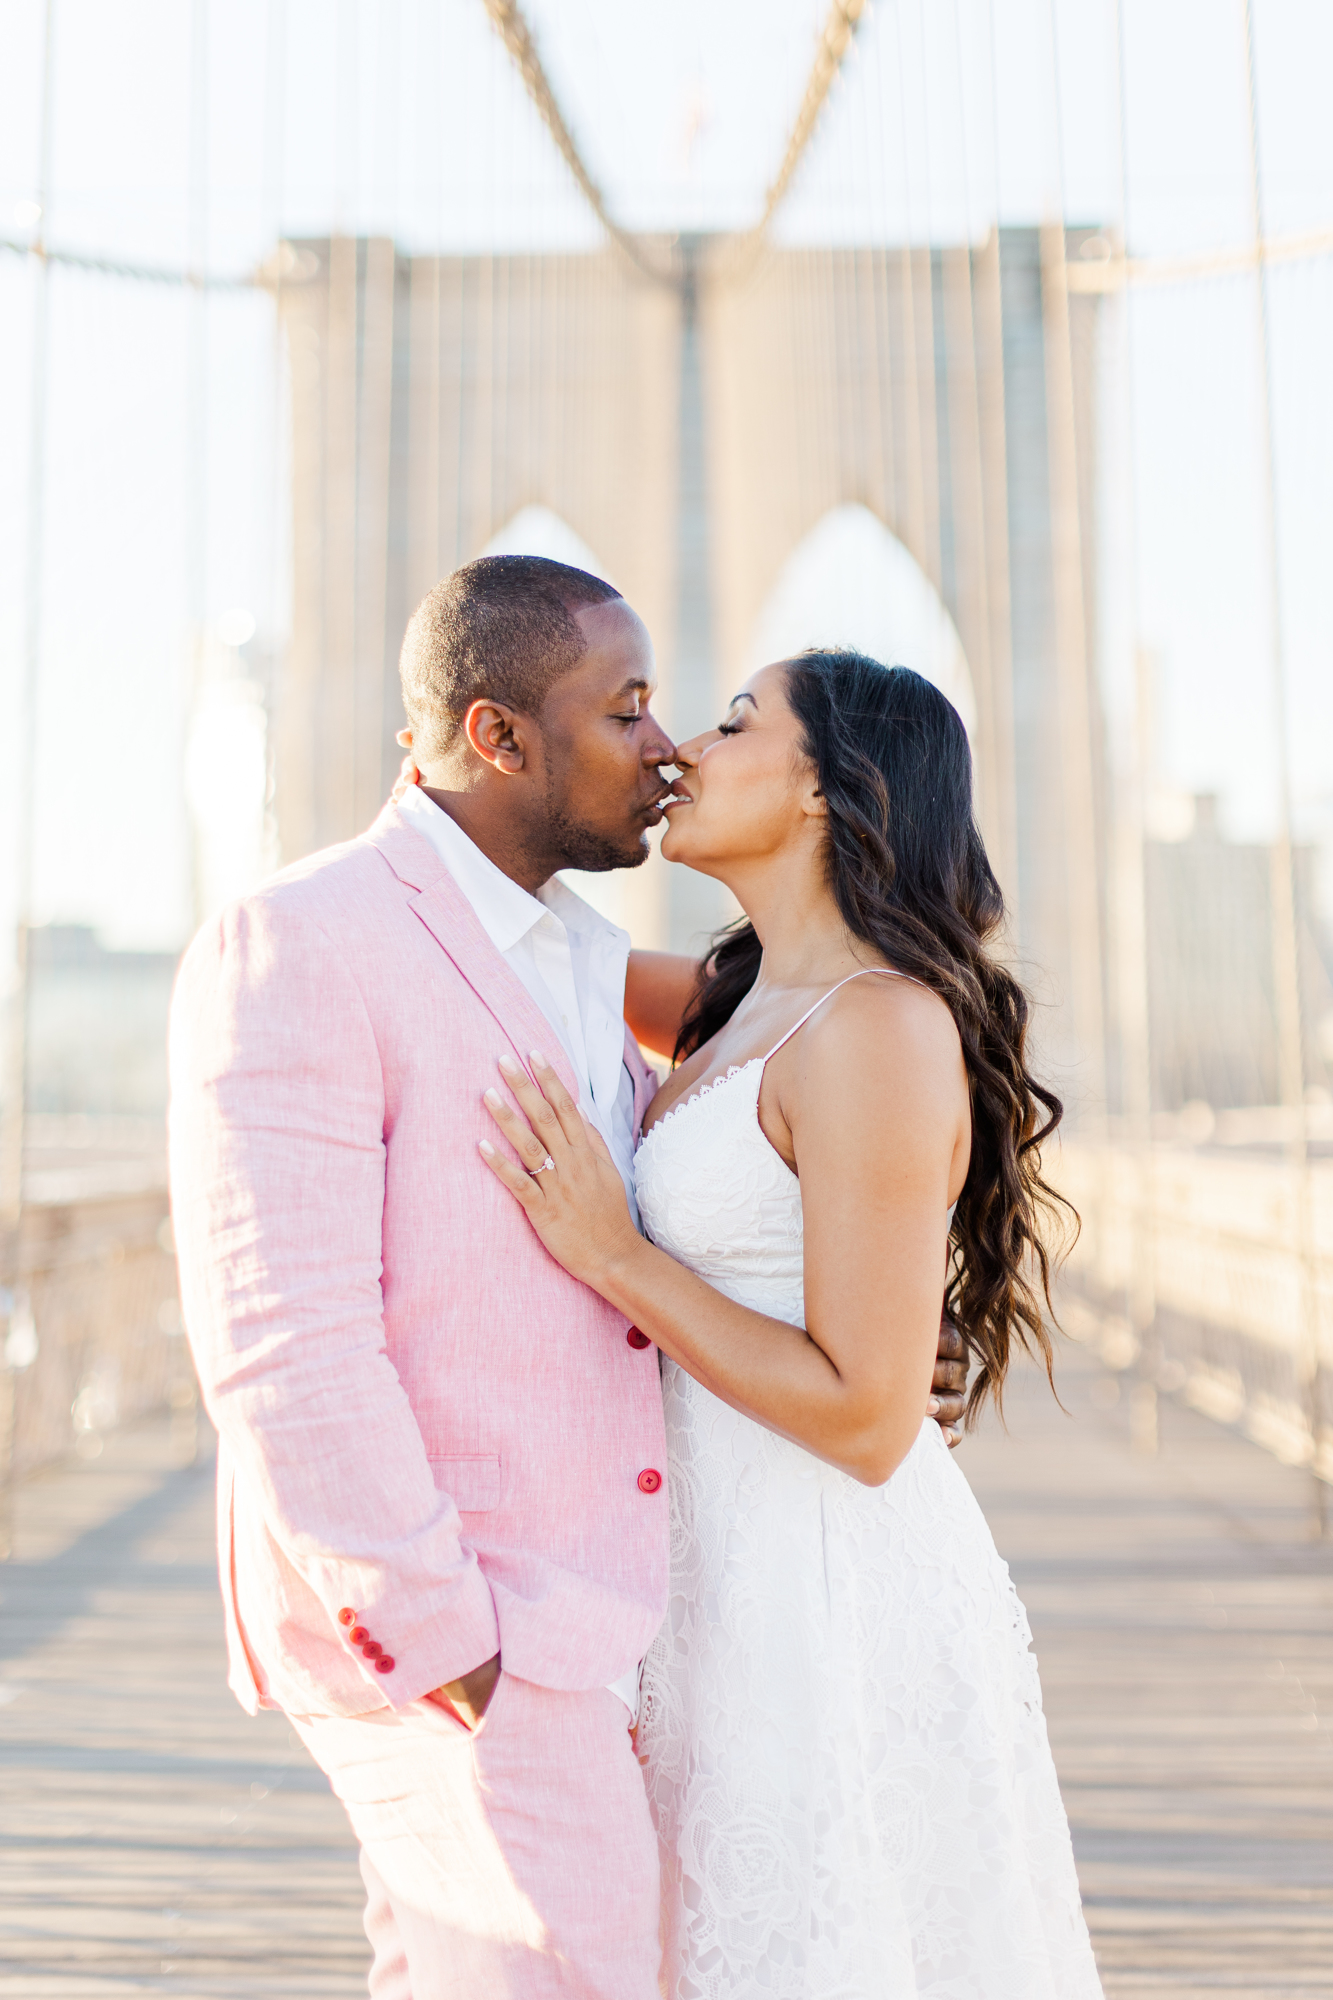 Special Engagement Photos at Sunrise, New York